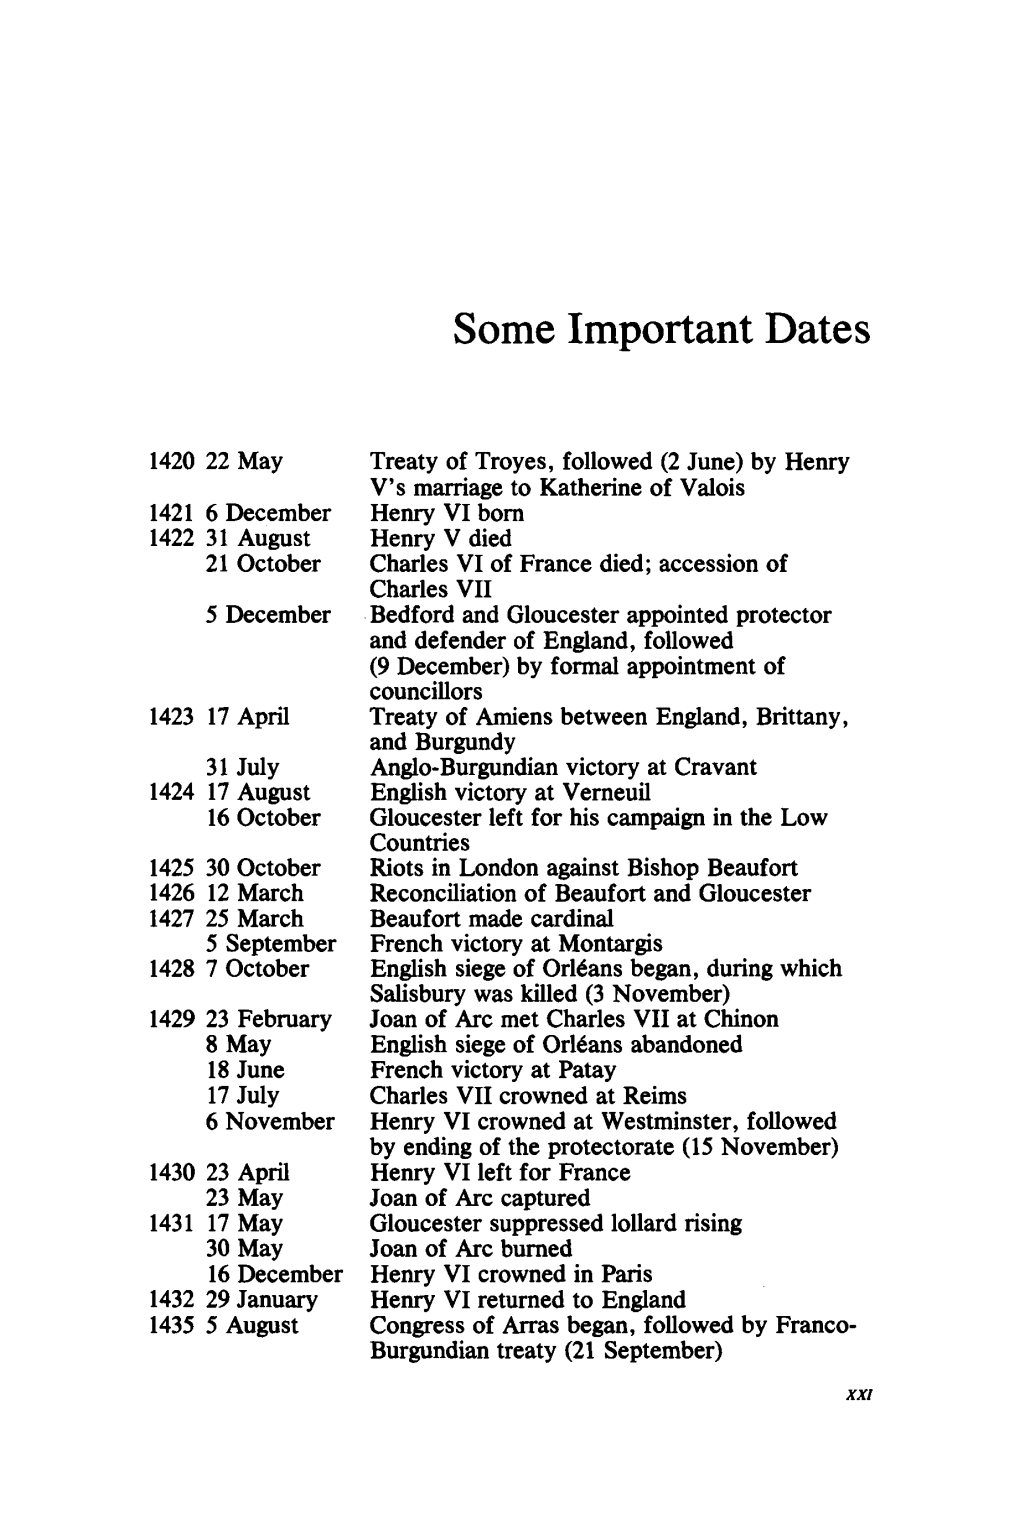 Some Important Dates